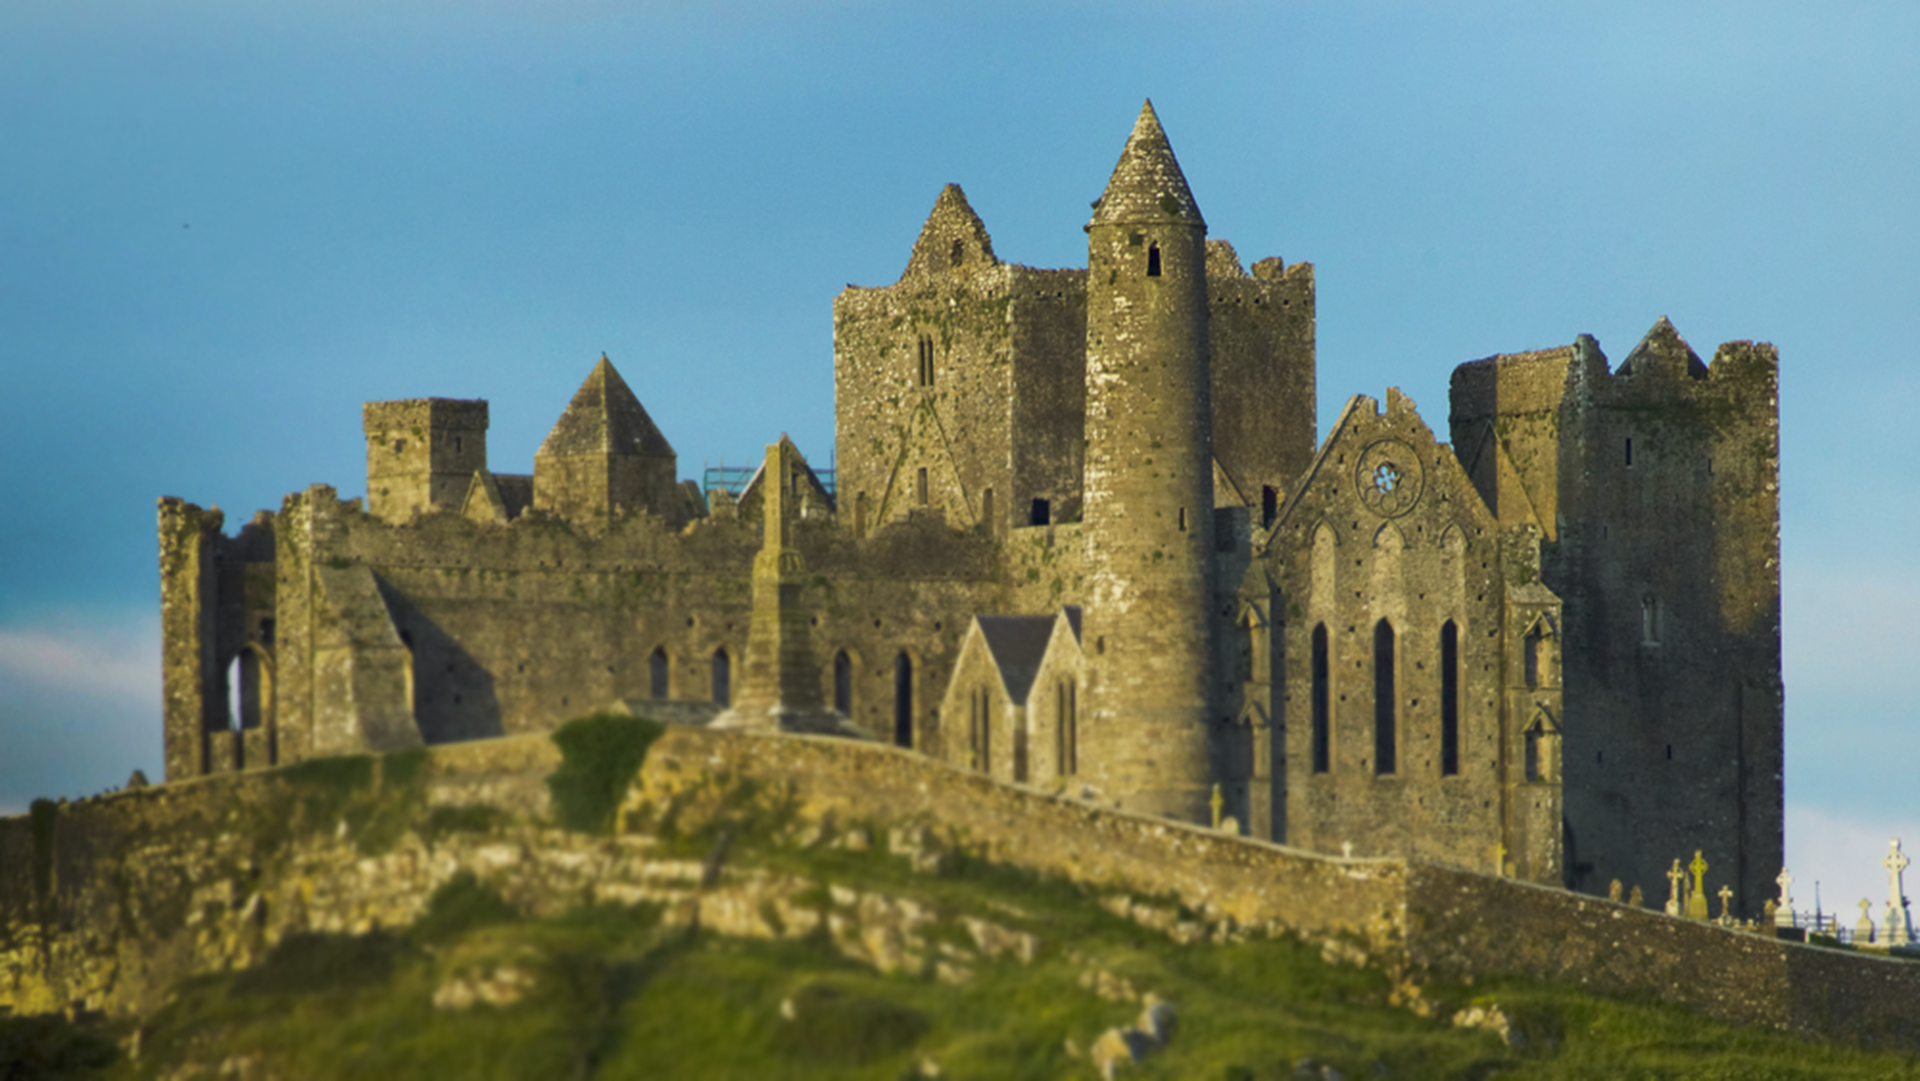 Attractions in Ireland - Lonely Planet